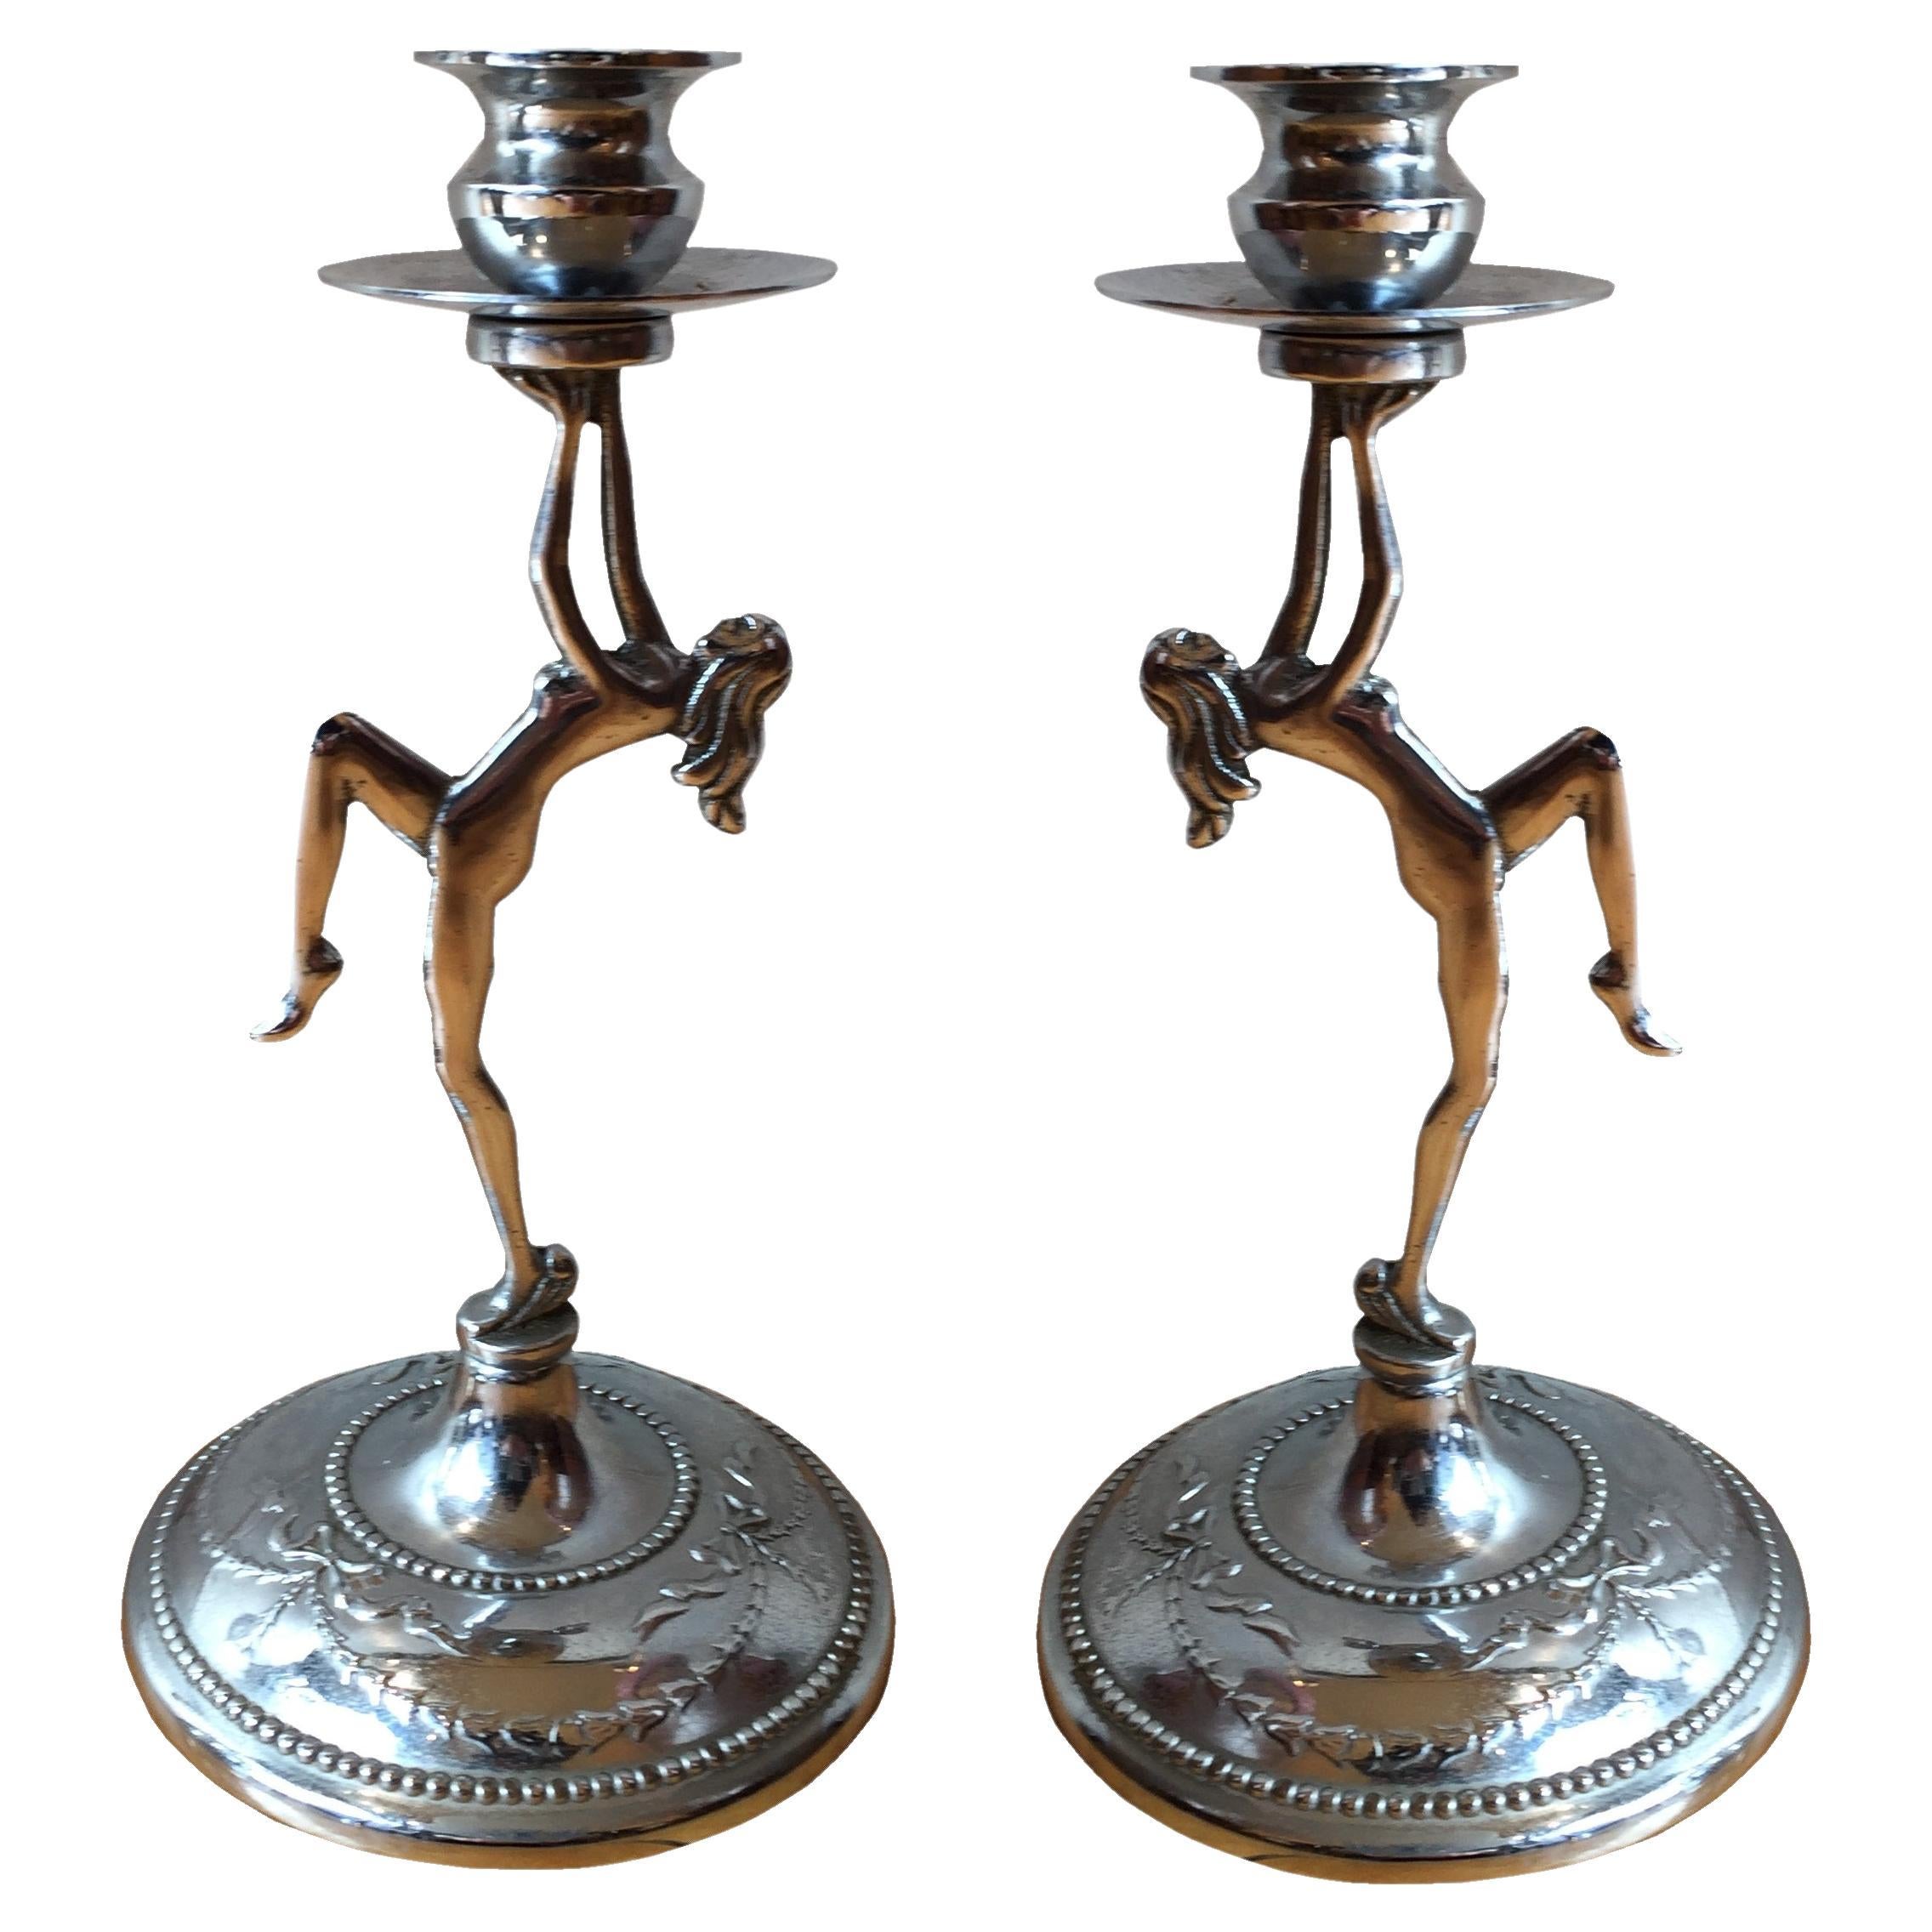 Pair of Women Candelabras, Sign, Made in England, Art Deco